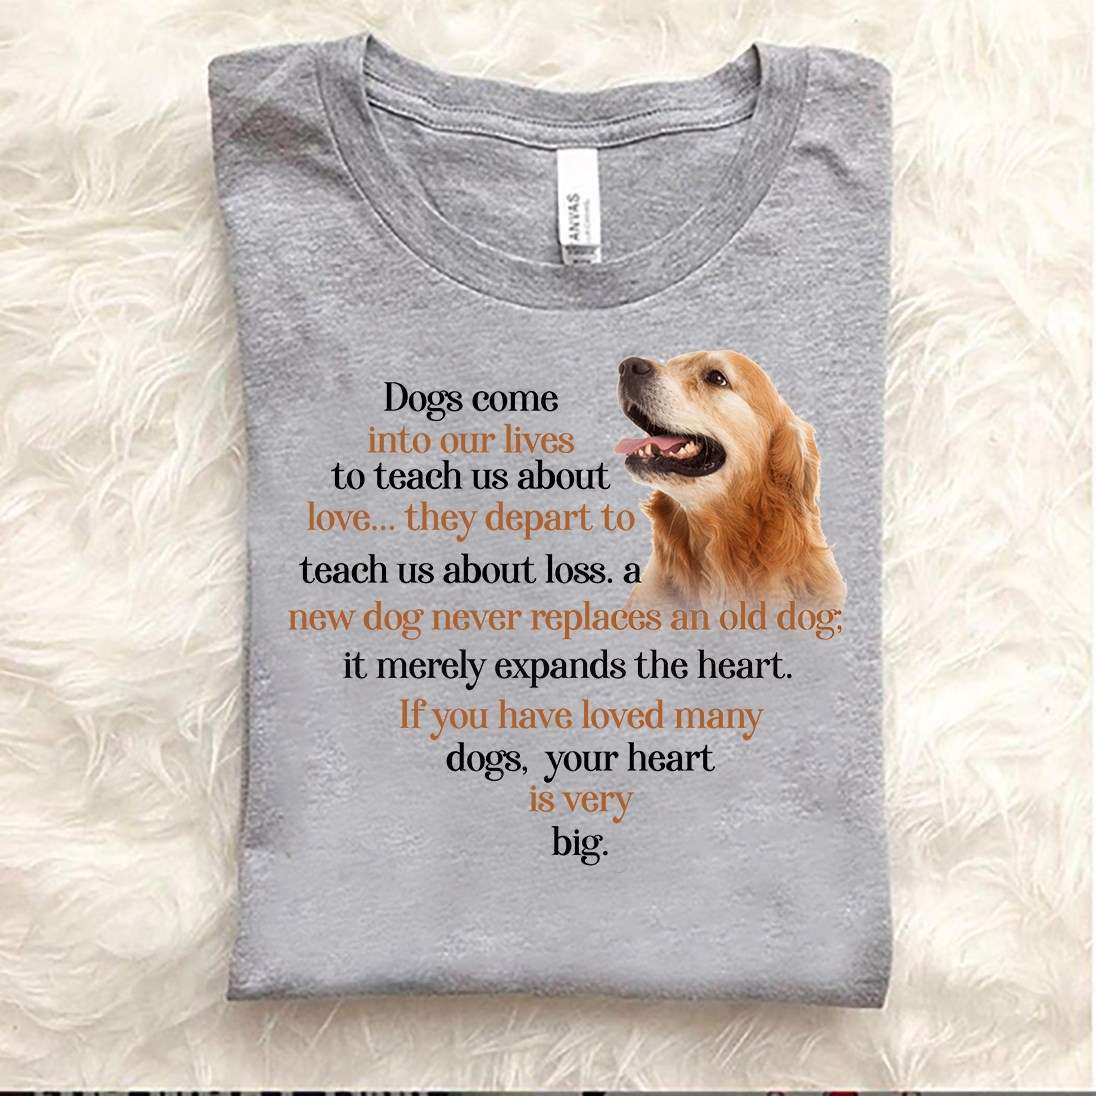 Golden Retriever - Dogs come into our lives to teach us about love...they depart to teach us about loss